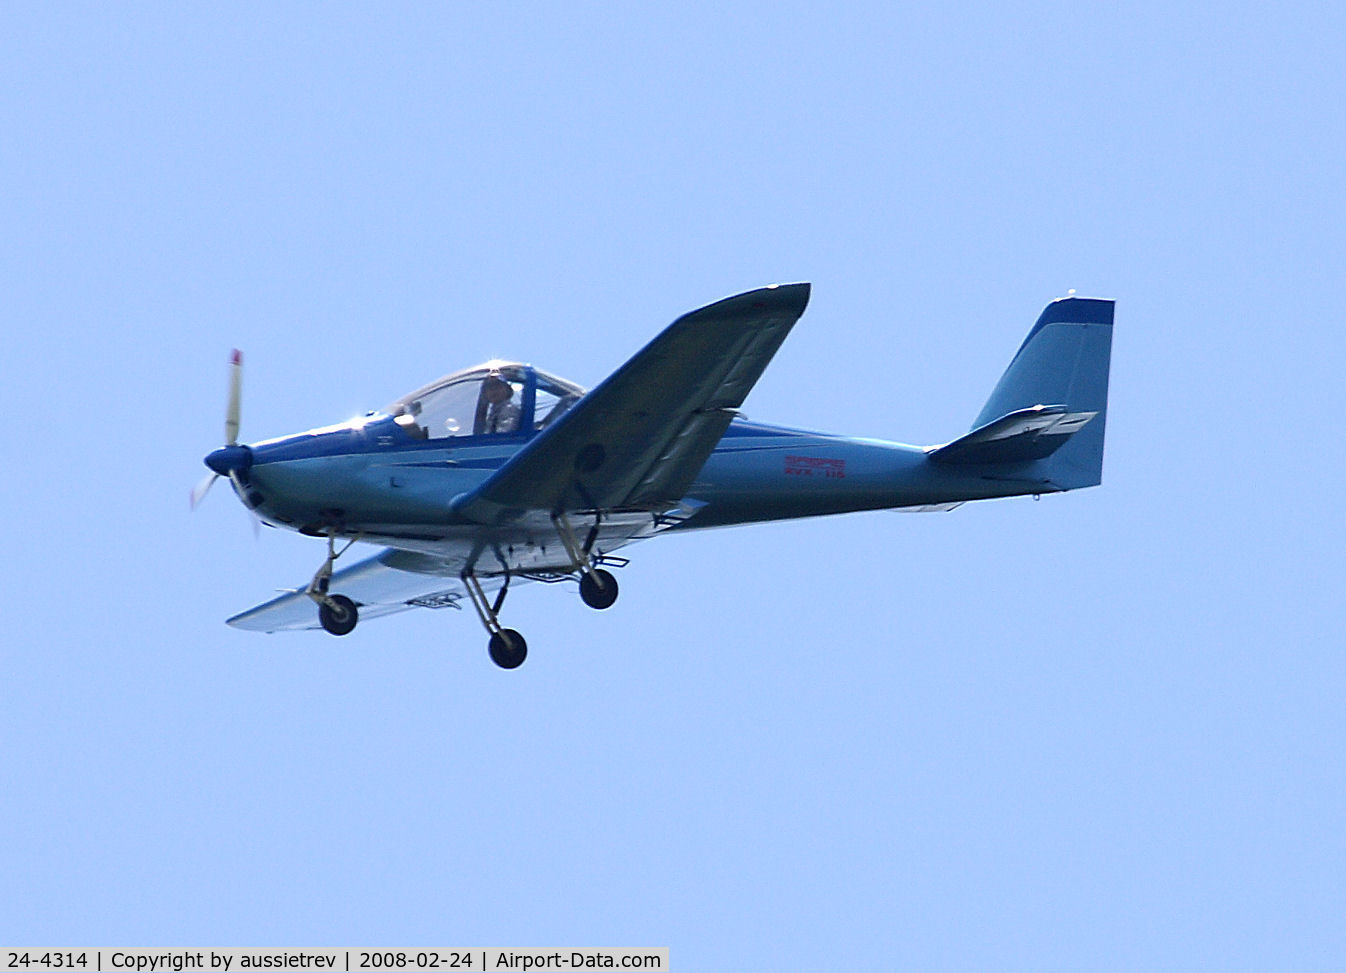 24-4314, 2005 Sabre RVX-115 C/N 5105125k, Circling for final approach to Hecks Field on the Gold Coast